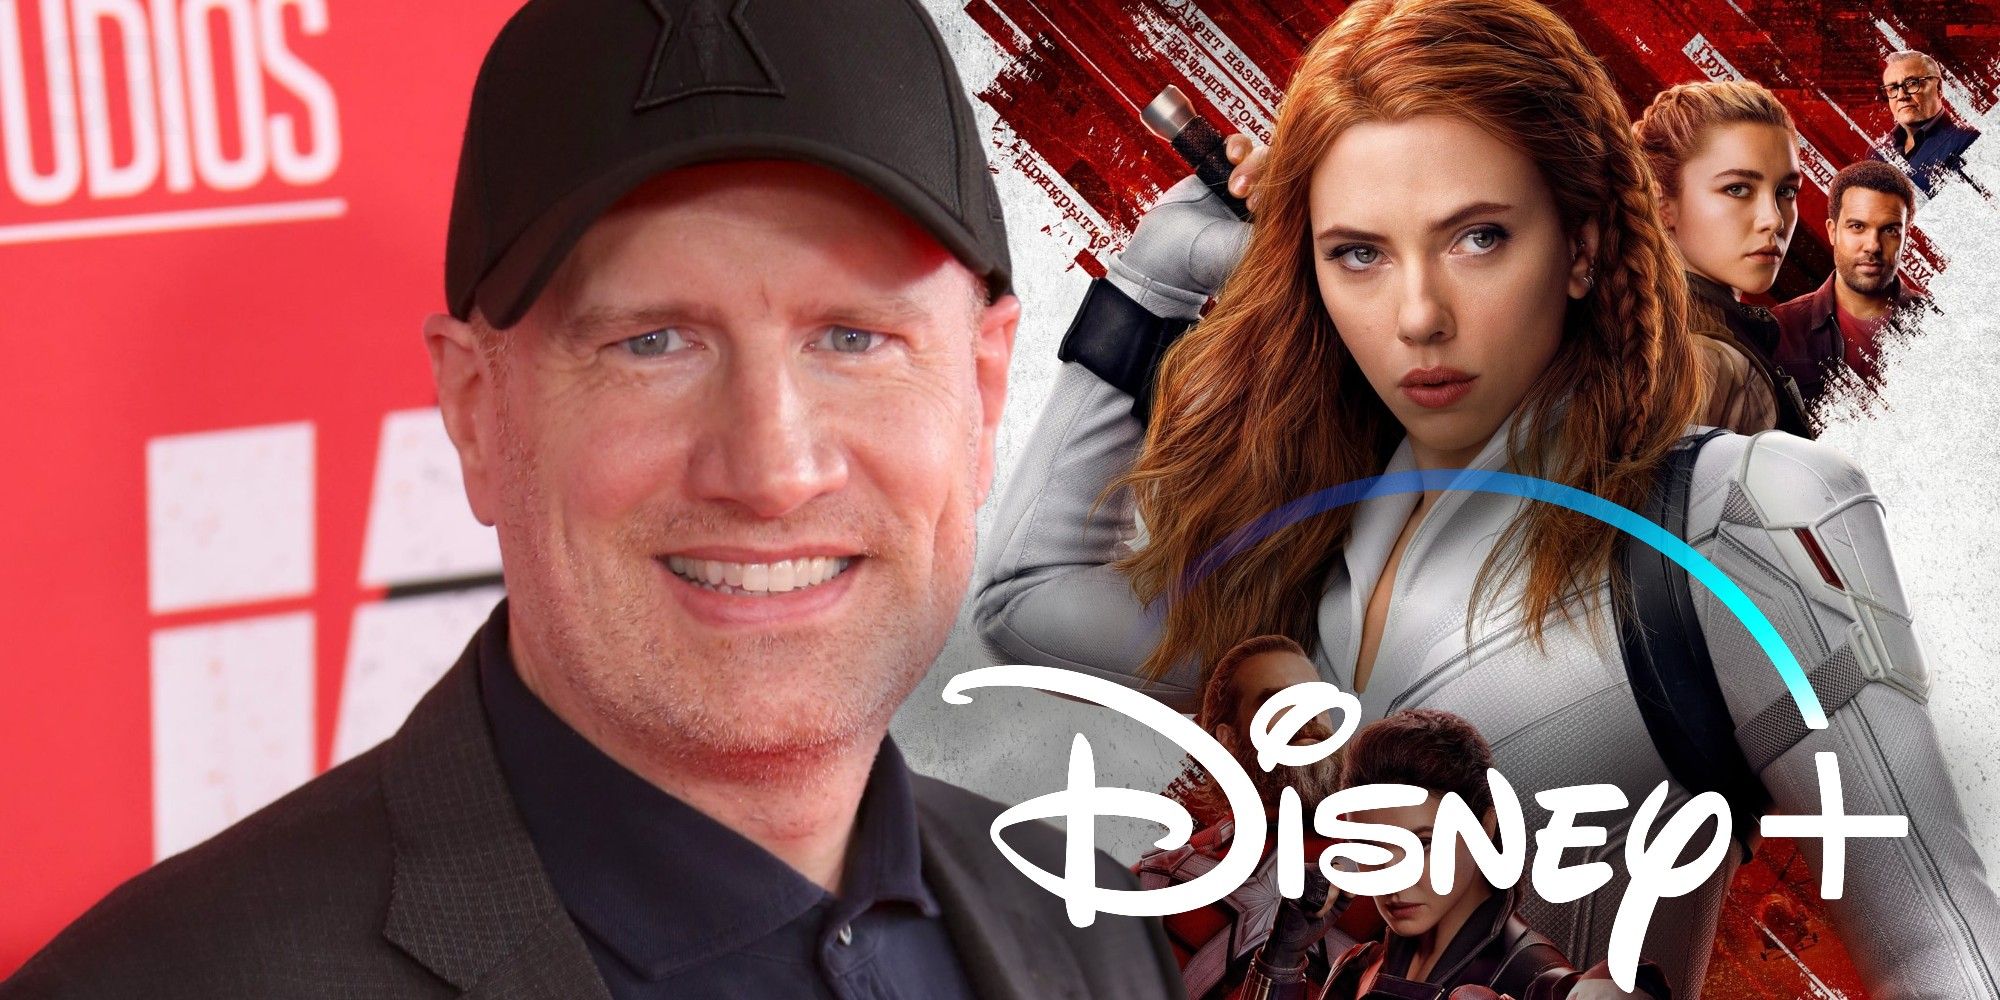 Split image showing Kevin Feige smiling and a poster for Black Widow with the DIsney+ logo